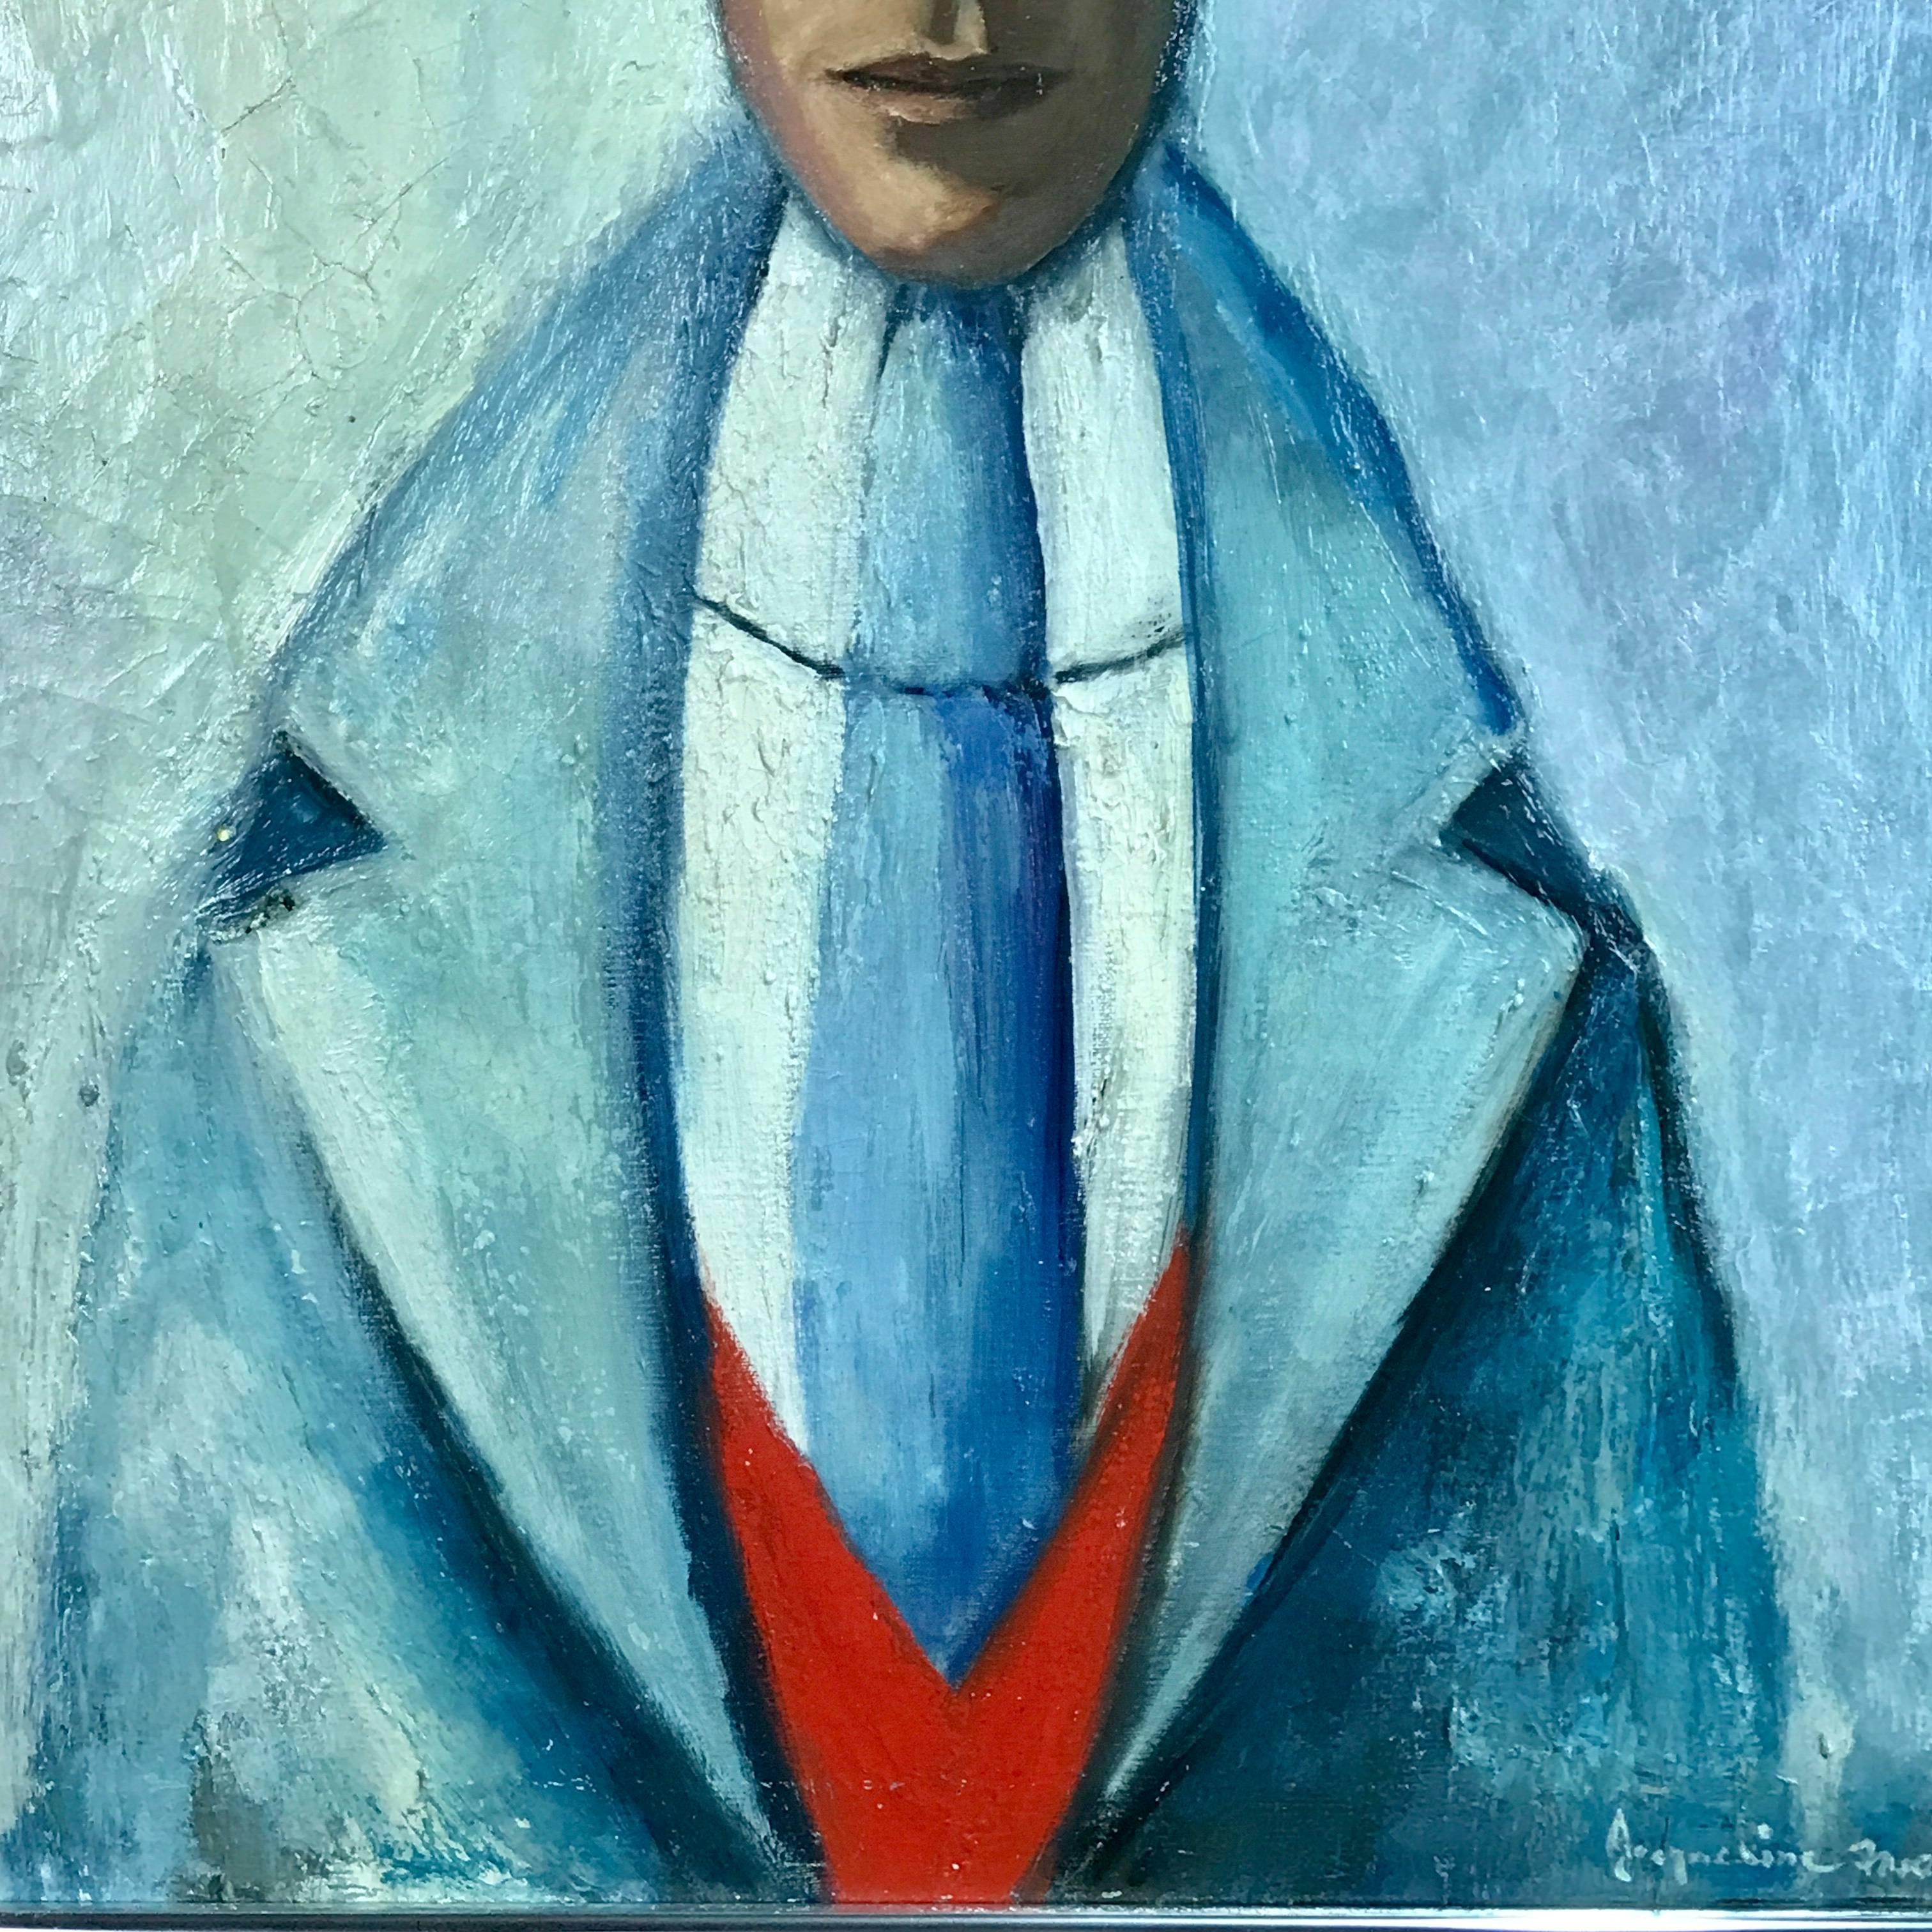 Painted French Midcentury Portrait of a Man by Jacqueline Fromenteau